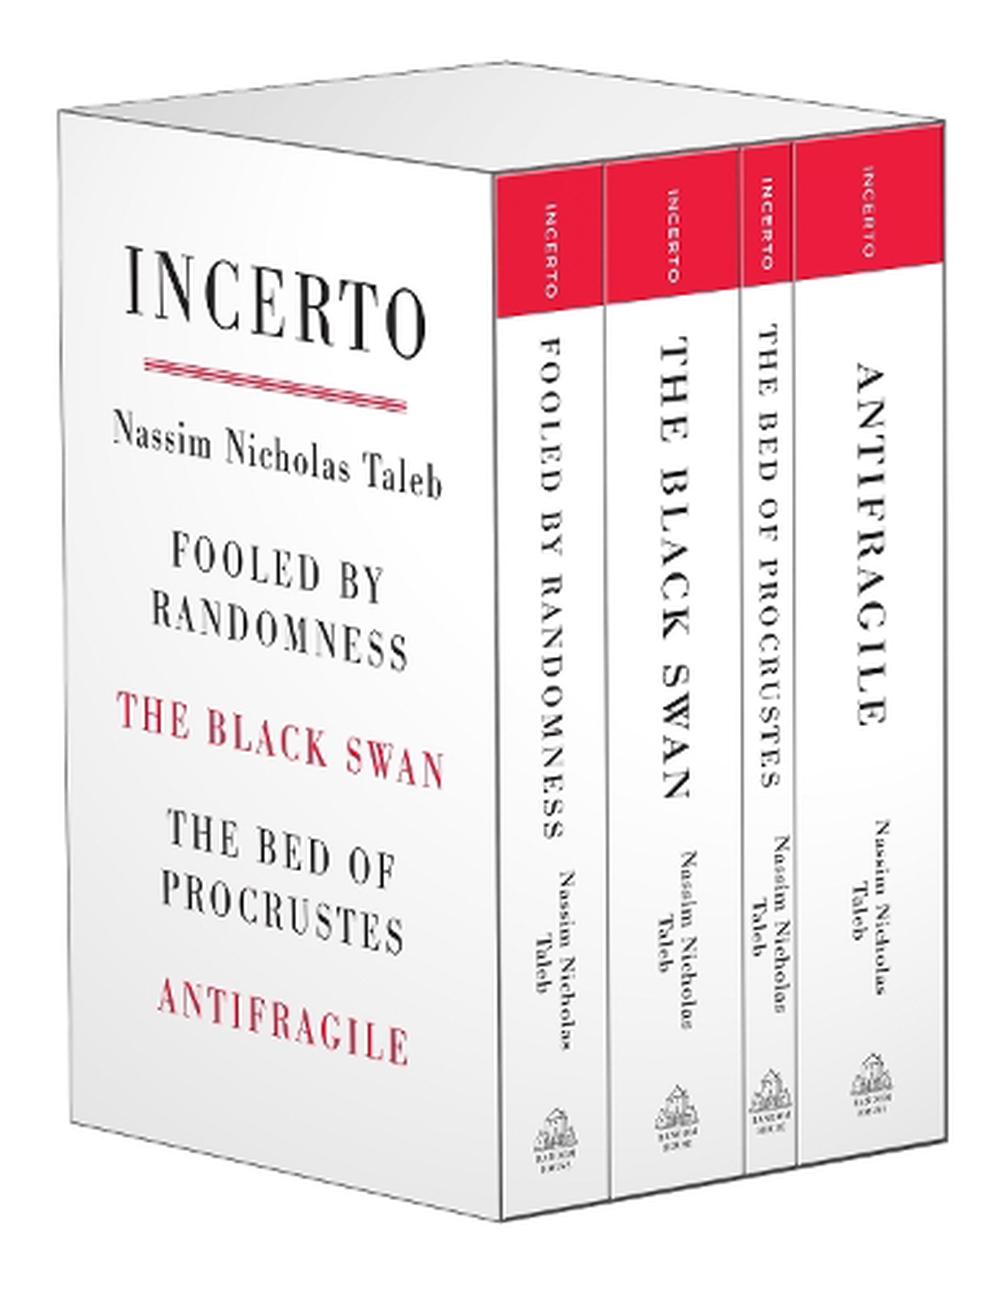 Incerto-Fooled-by-Randomness-The-Black-Swan-The-Bed-of-Procrustes-Antifragile